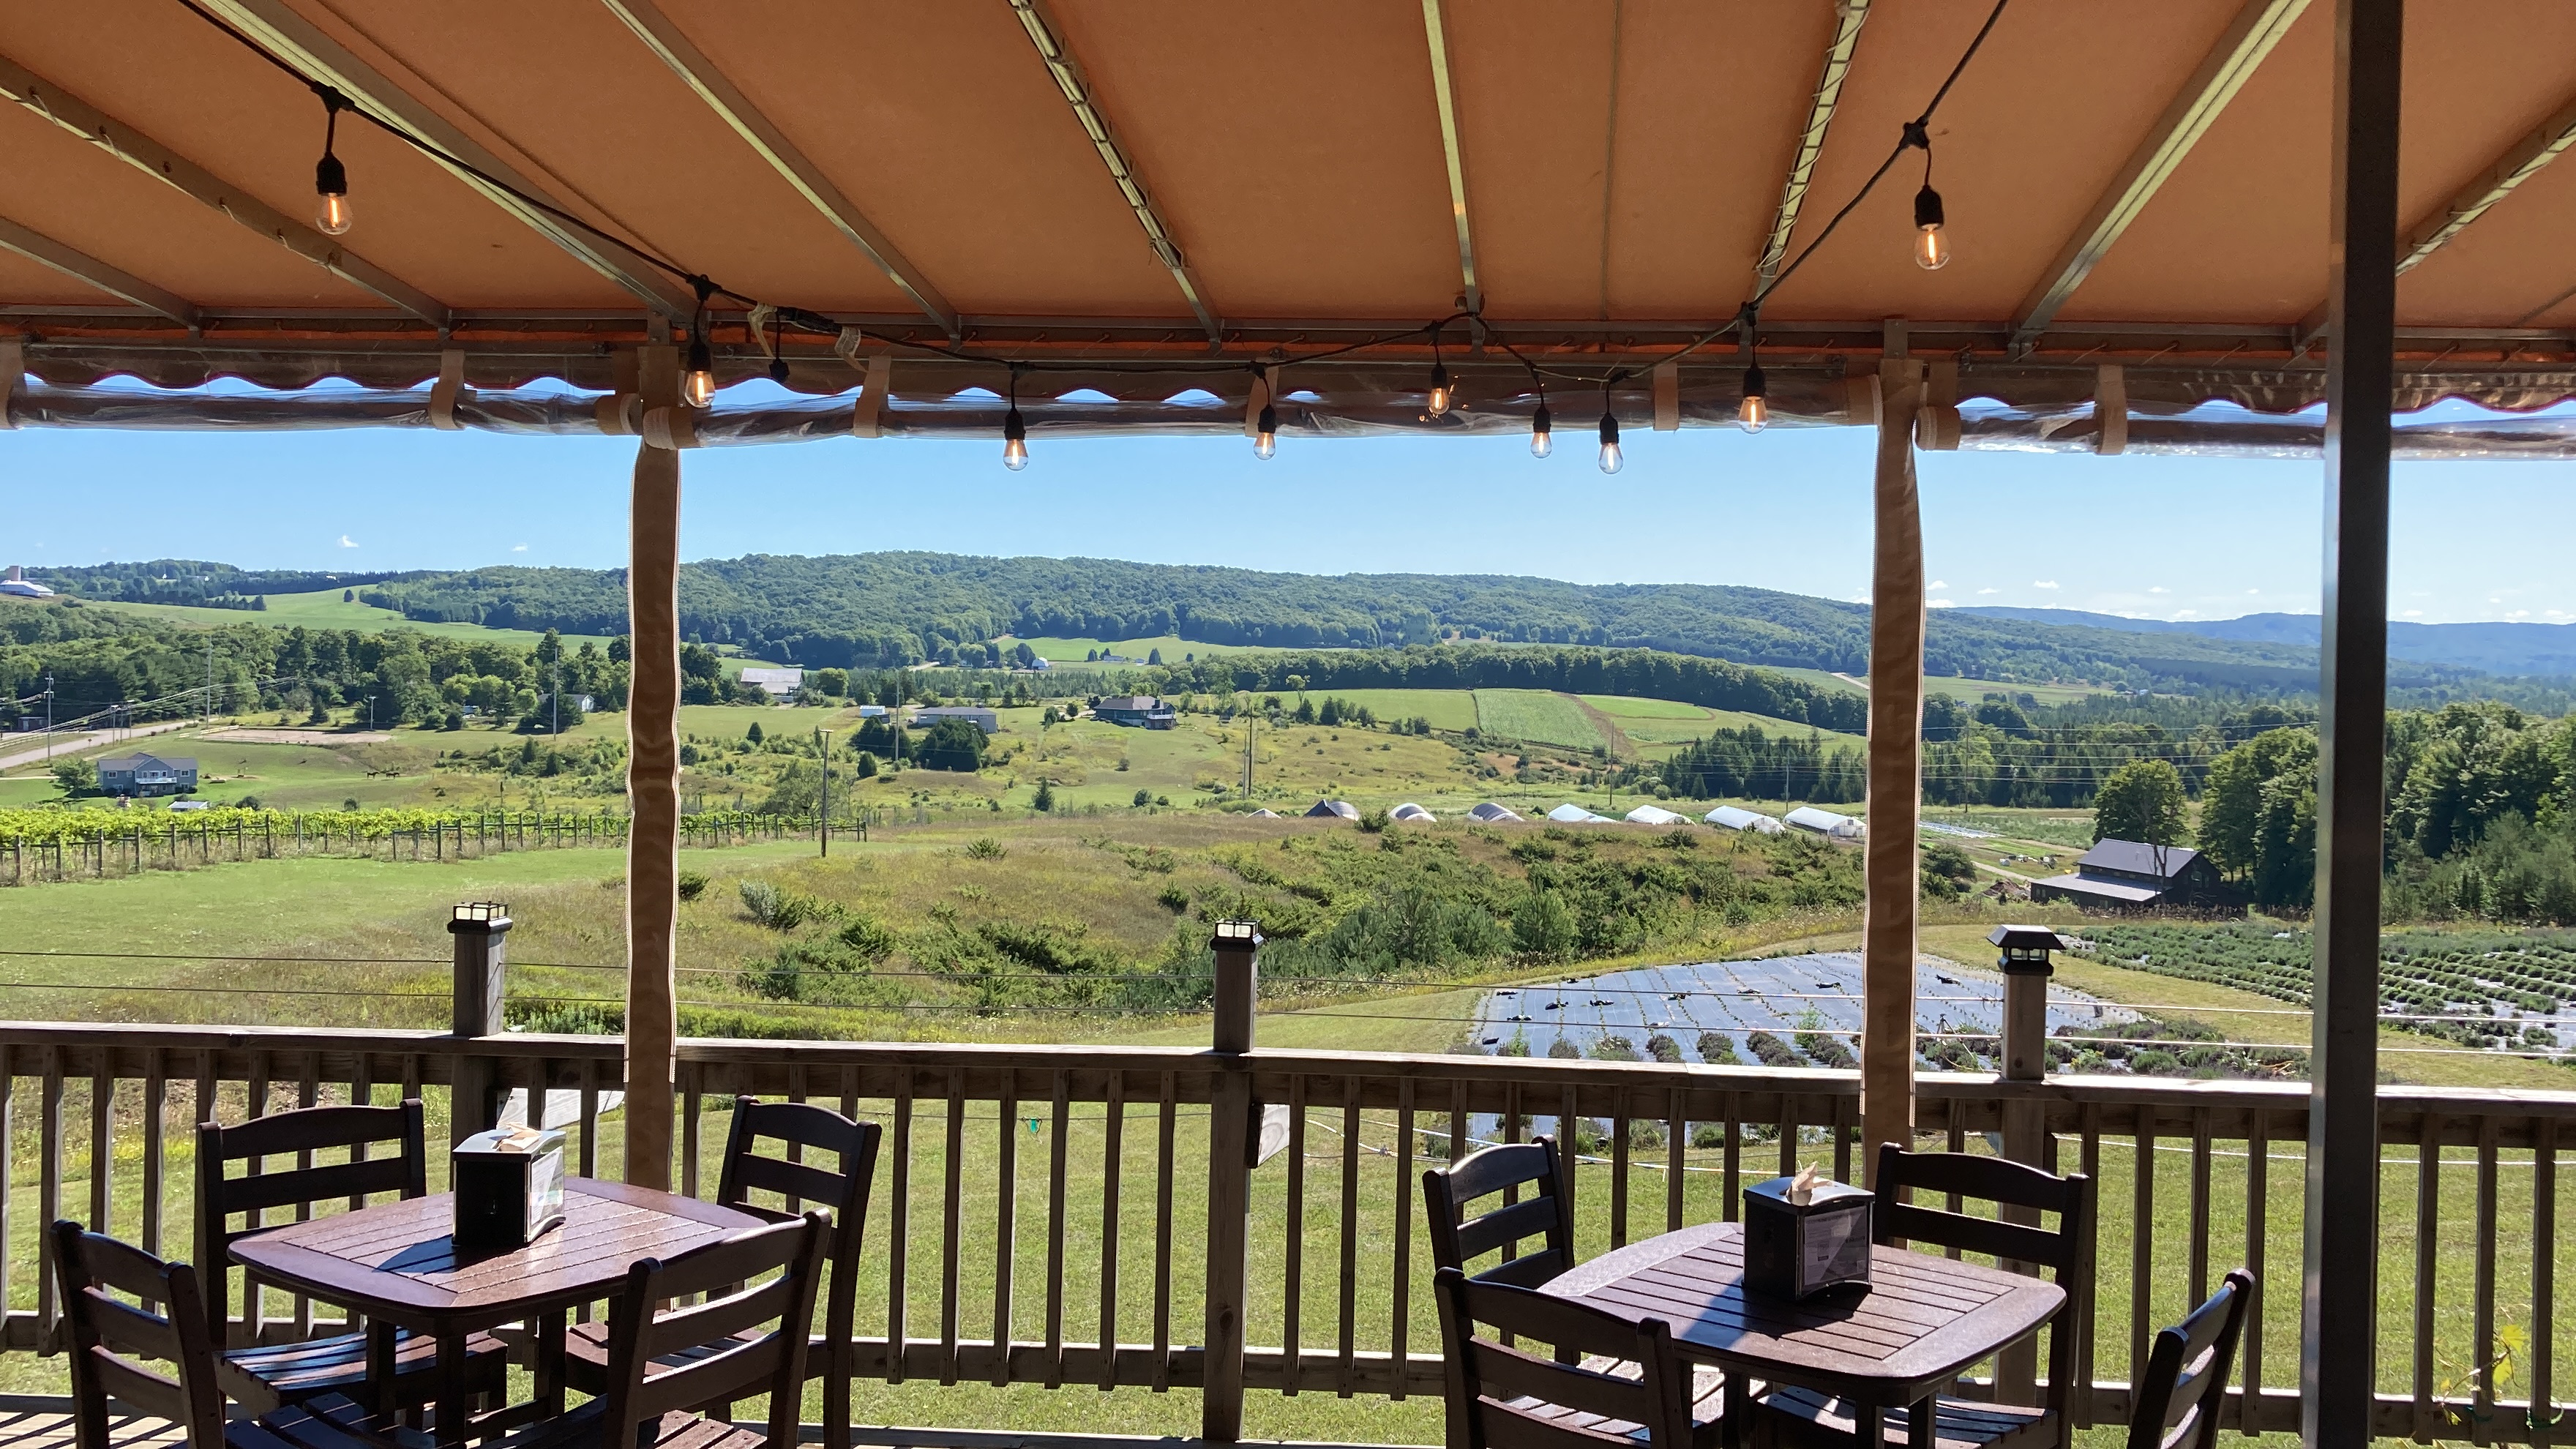 Our patio overlooking rolling hills.